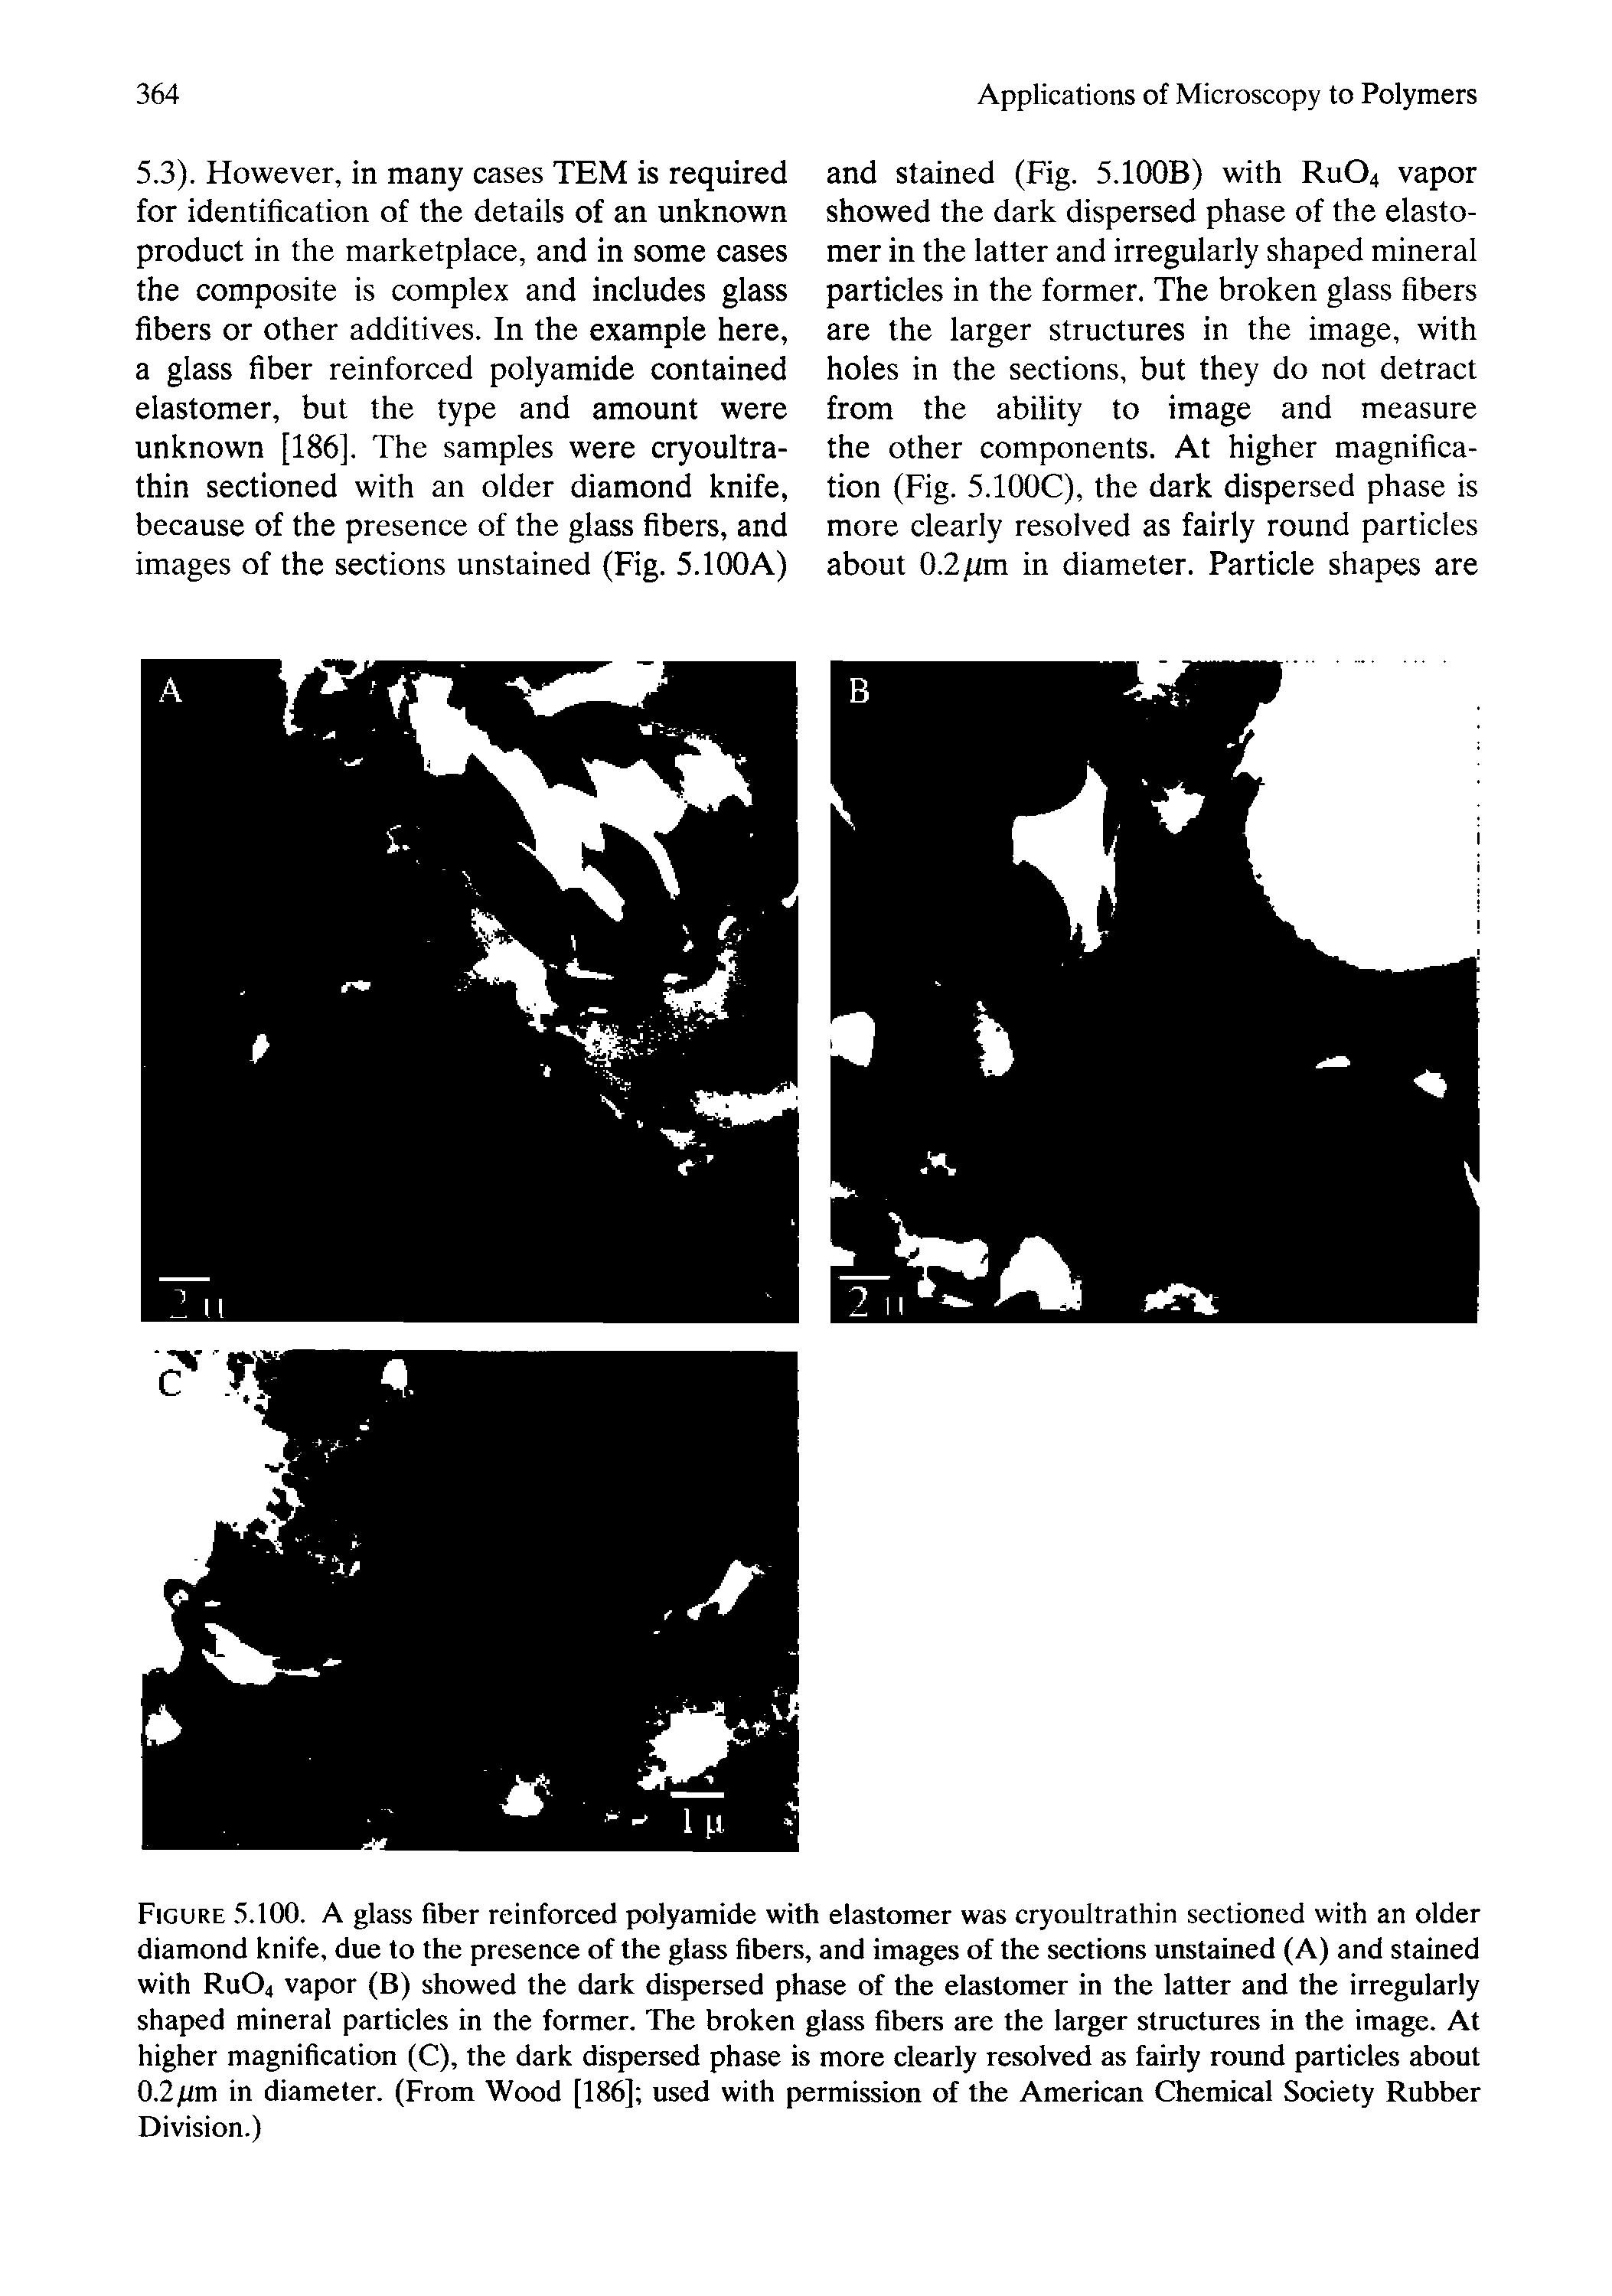 Figure. 5.100. A glass fiber reinforced polyamide with elastomer was cryoultrathin sectioned with an older diamond knife, due to the presence of the glass fibers, and images of the sections unstained (A) and stained with RUO4 vapor (B) showed the dark dispersed phase of the elastomer in the latter and the irregularly shaped mineral particles in the former. The broken glass fibers are the larger structures in the image. At higher magnification (C), the dark dispersed phase is more clearly resolved as fairly round particles about 0.2/tm in diameter. (From Wood [186] used with permission of the American Chemical Society Rubber Division.)...